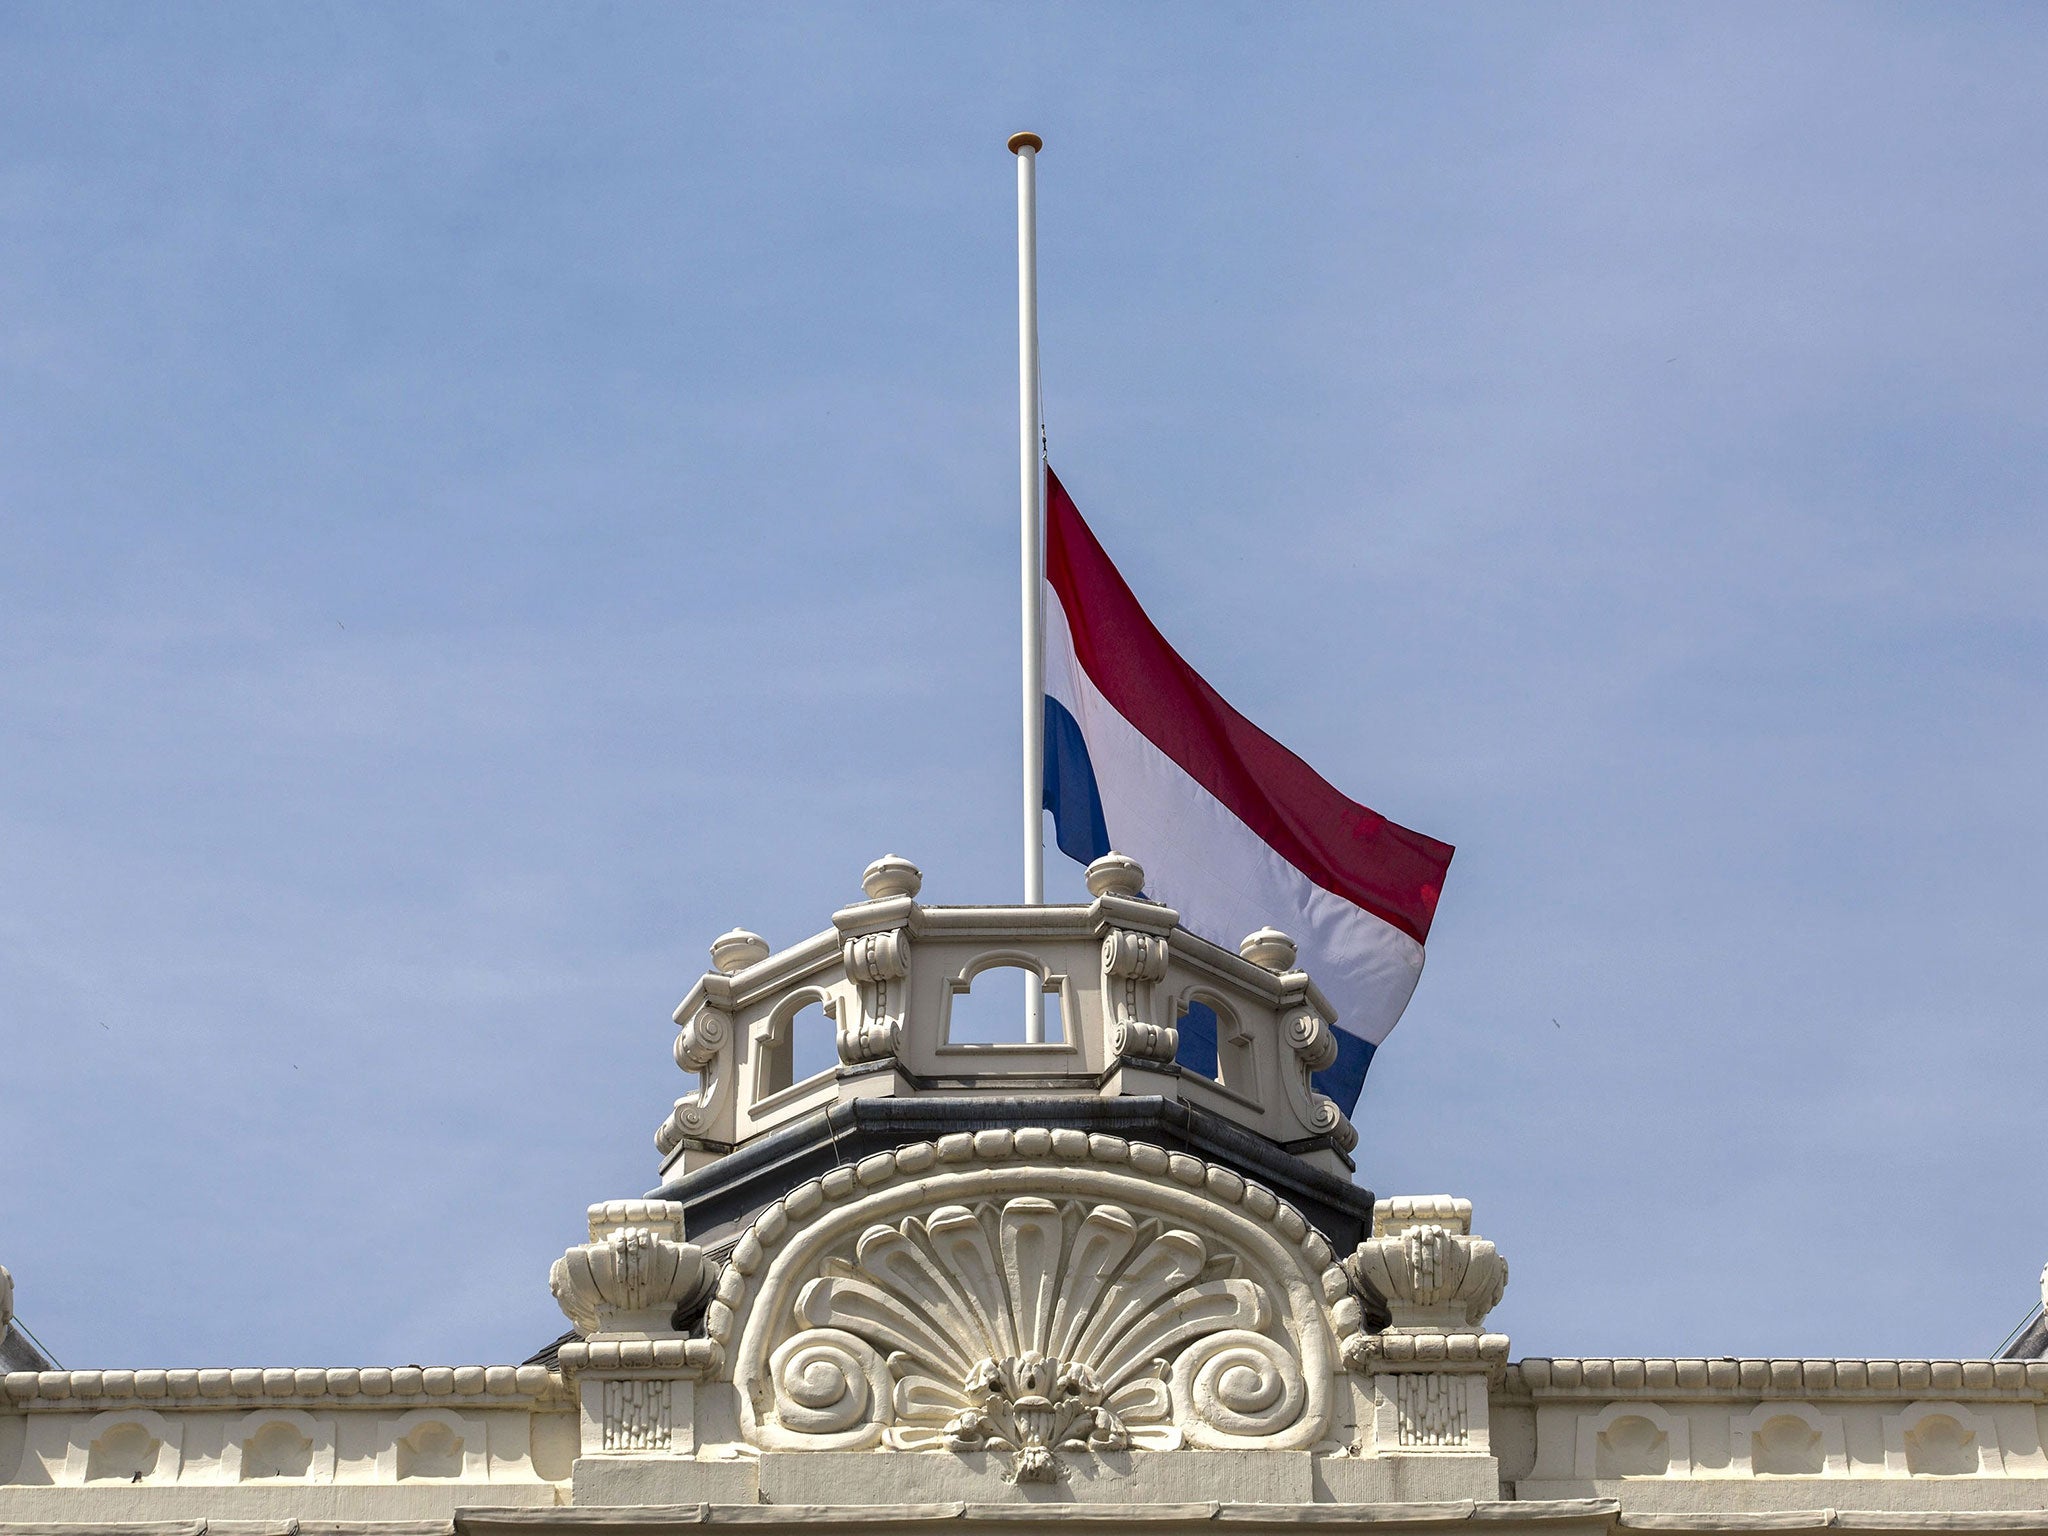 The Dutch flag flies at half-staff at the Kneuterdijk Palace in The Hague